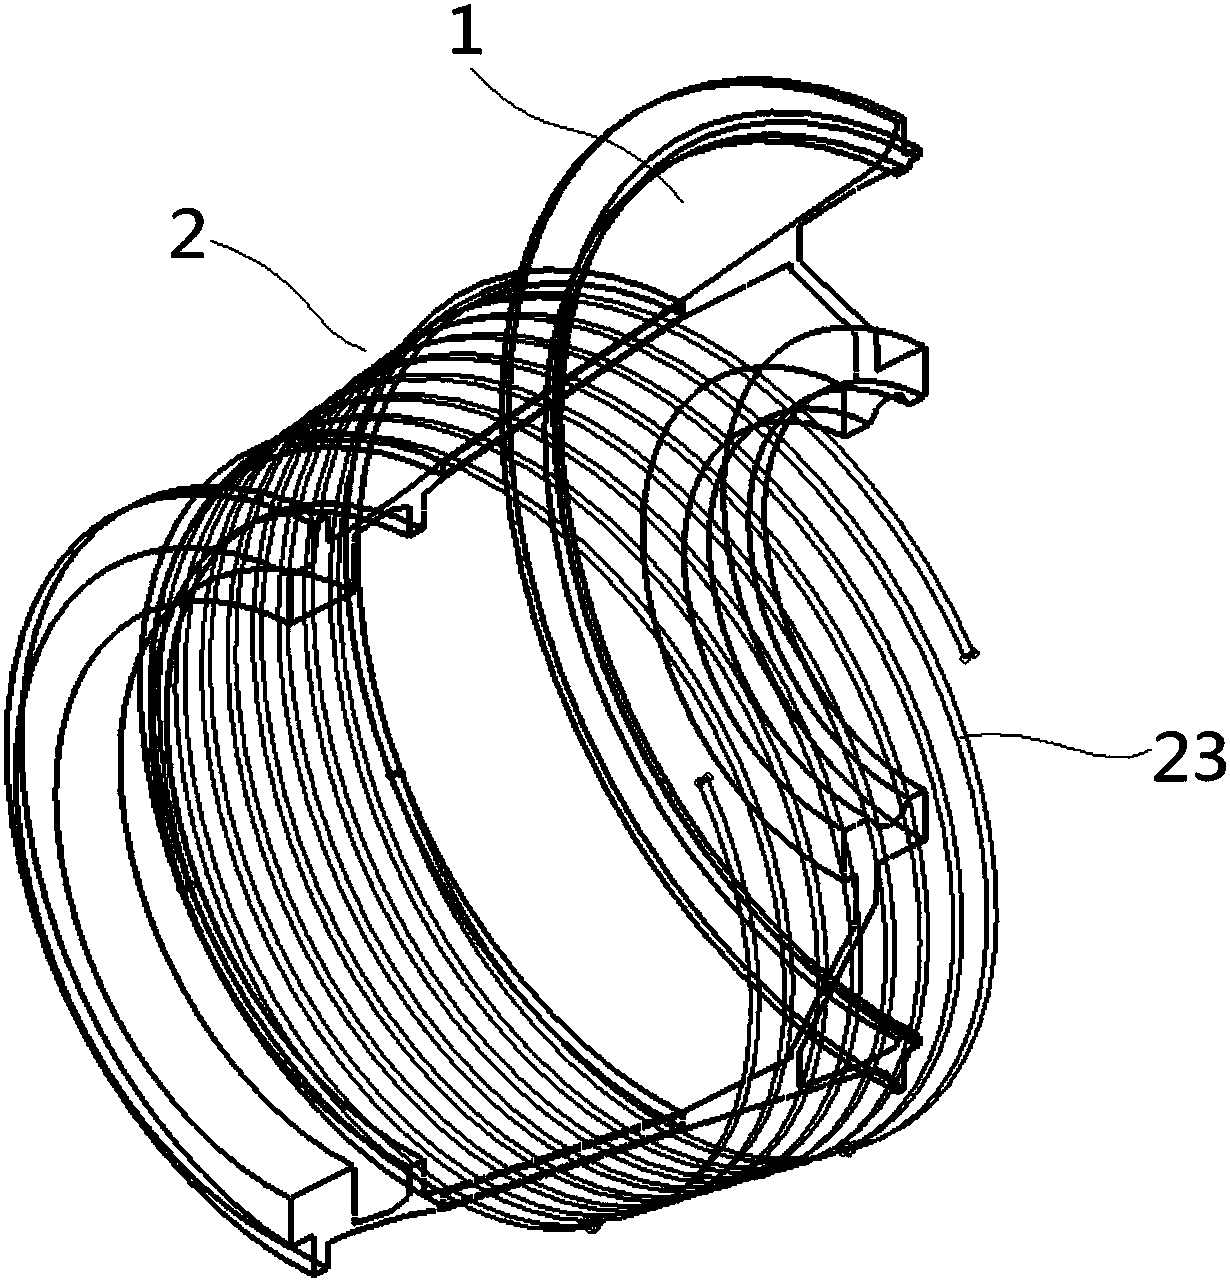 Voidable rotor support structure and aero-engine